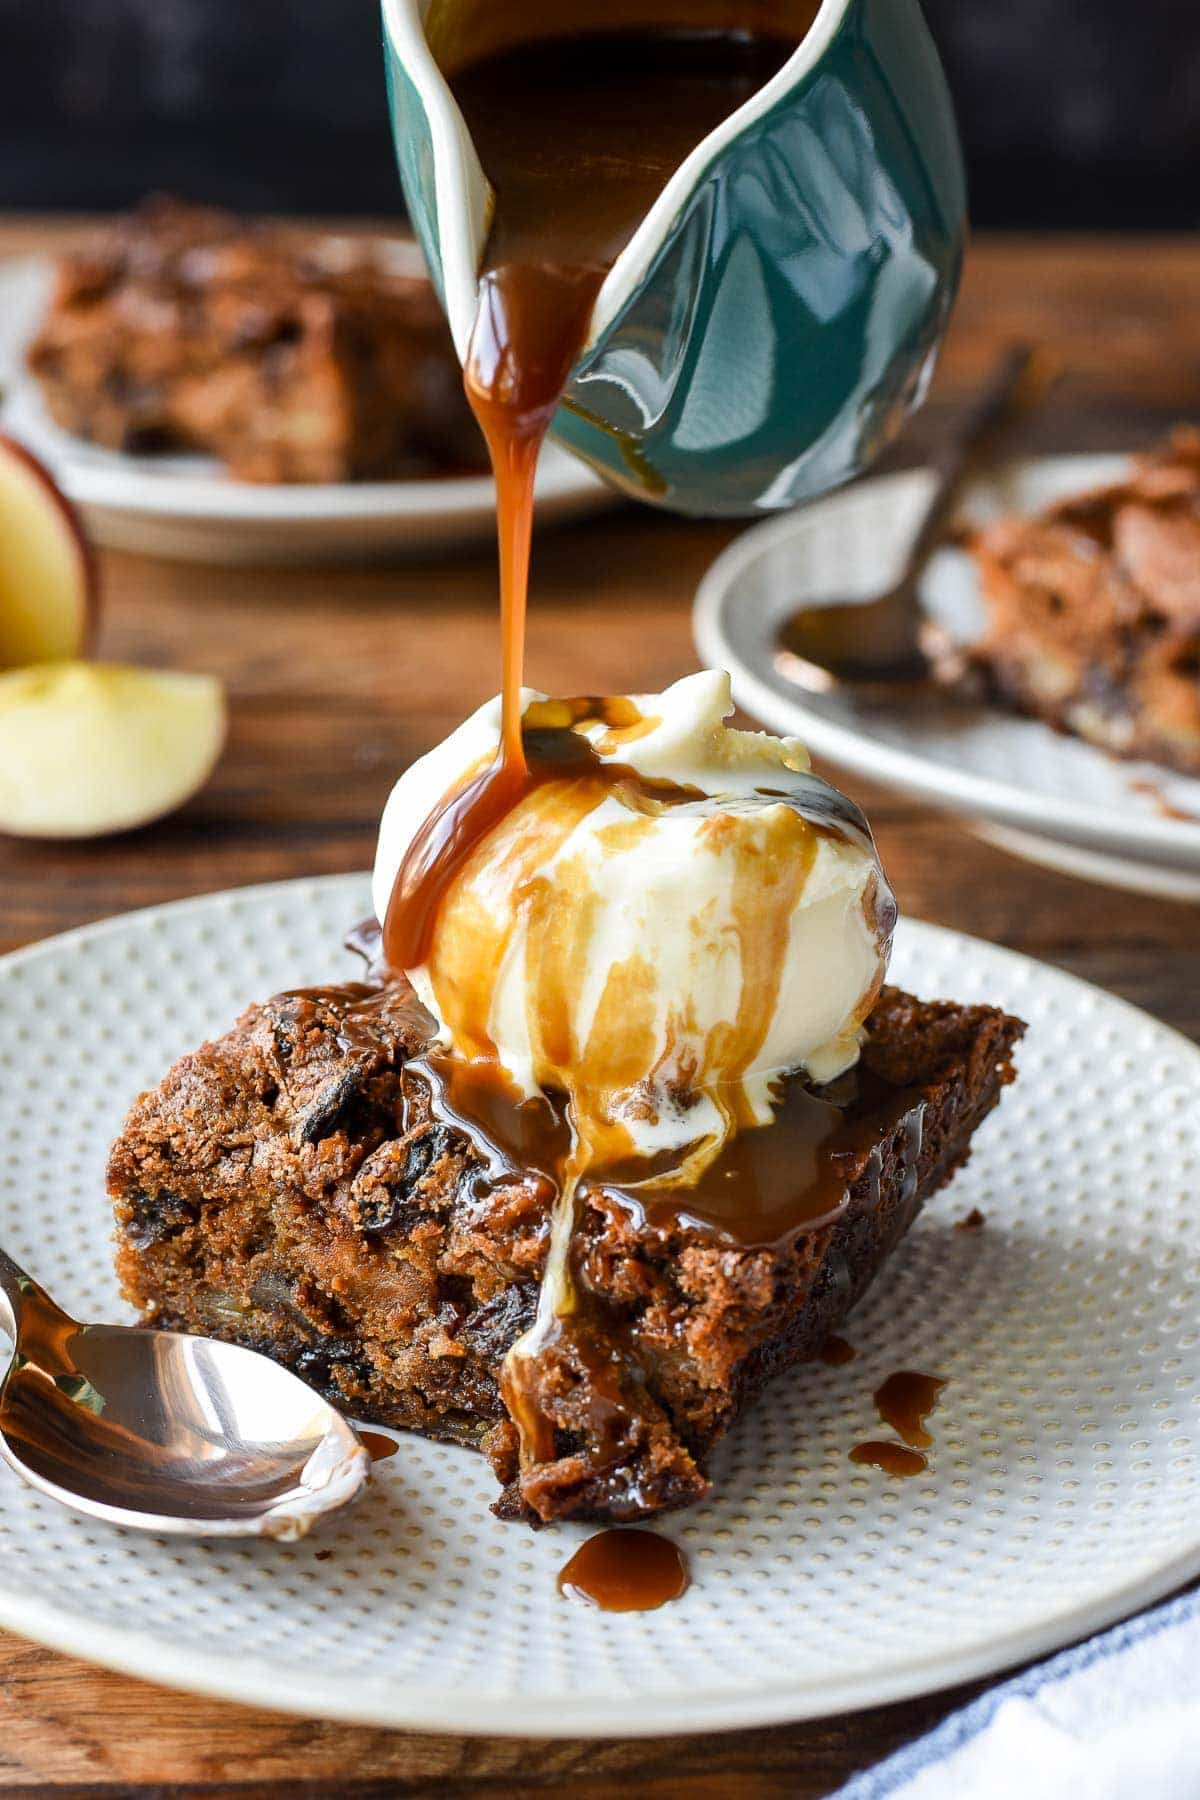 a piece of spiced apple cake on a plate, topped with ice cream and being drizzled with caramel sauce